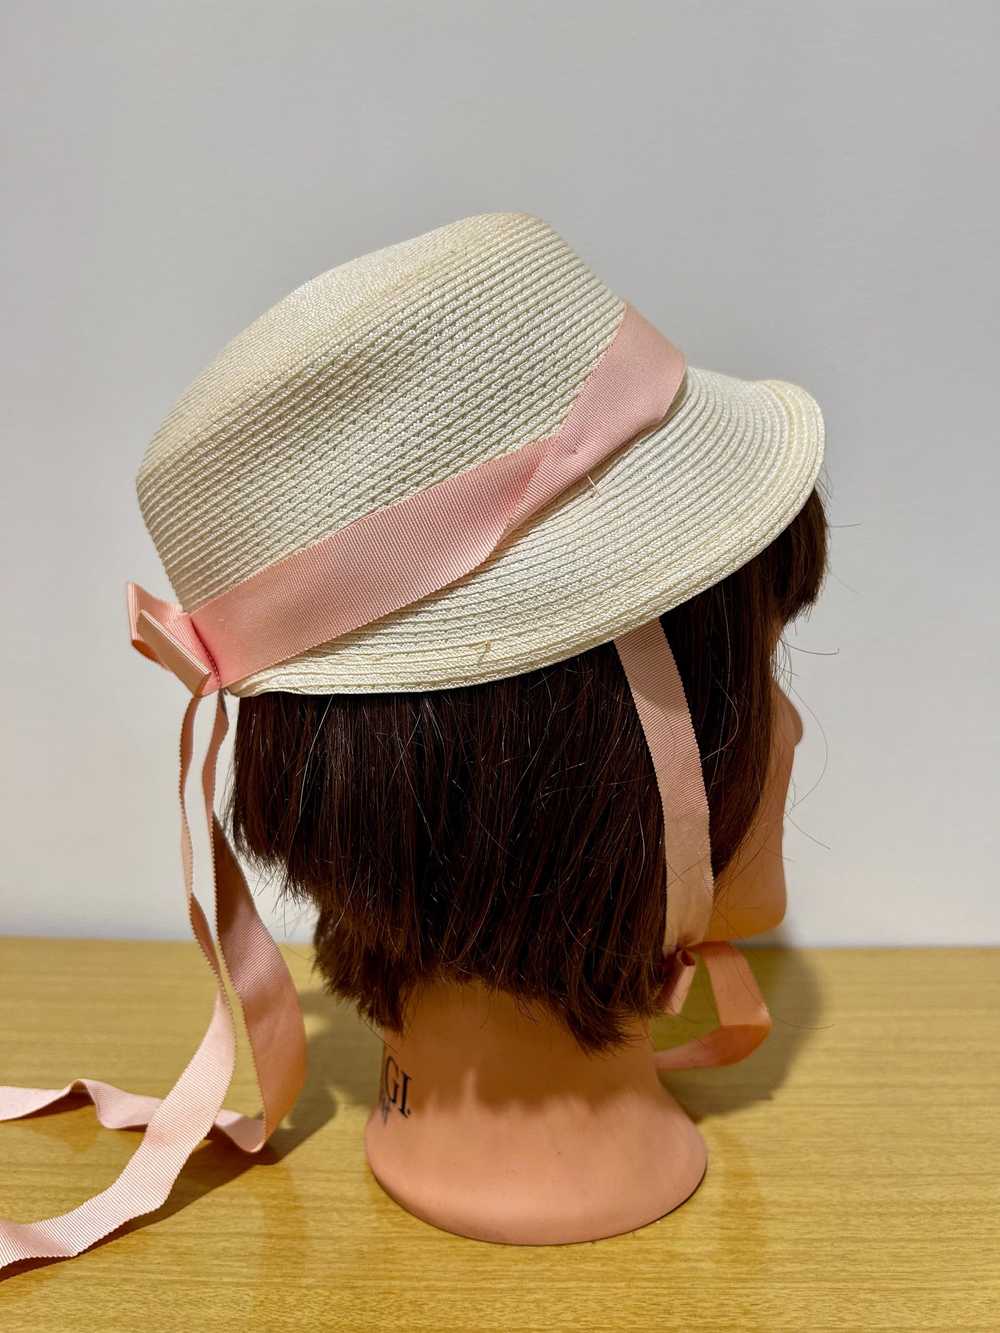 Vintage Sun Hat with Pink Ribbon and Flowers - image 5